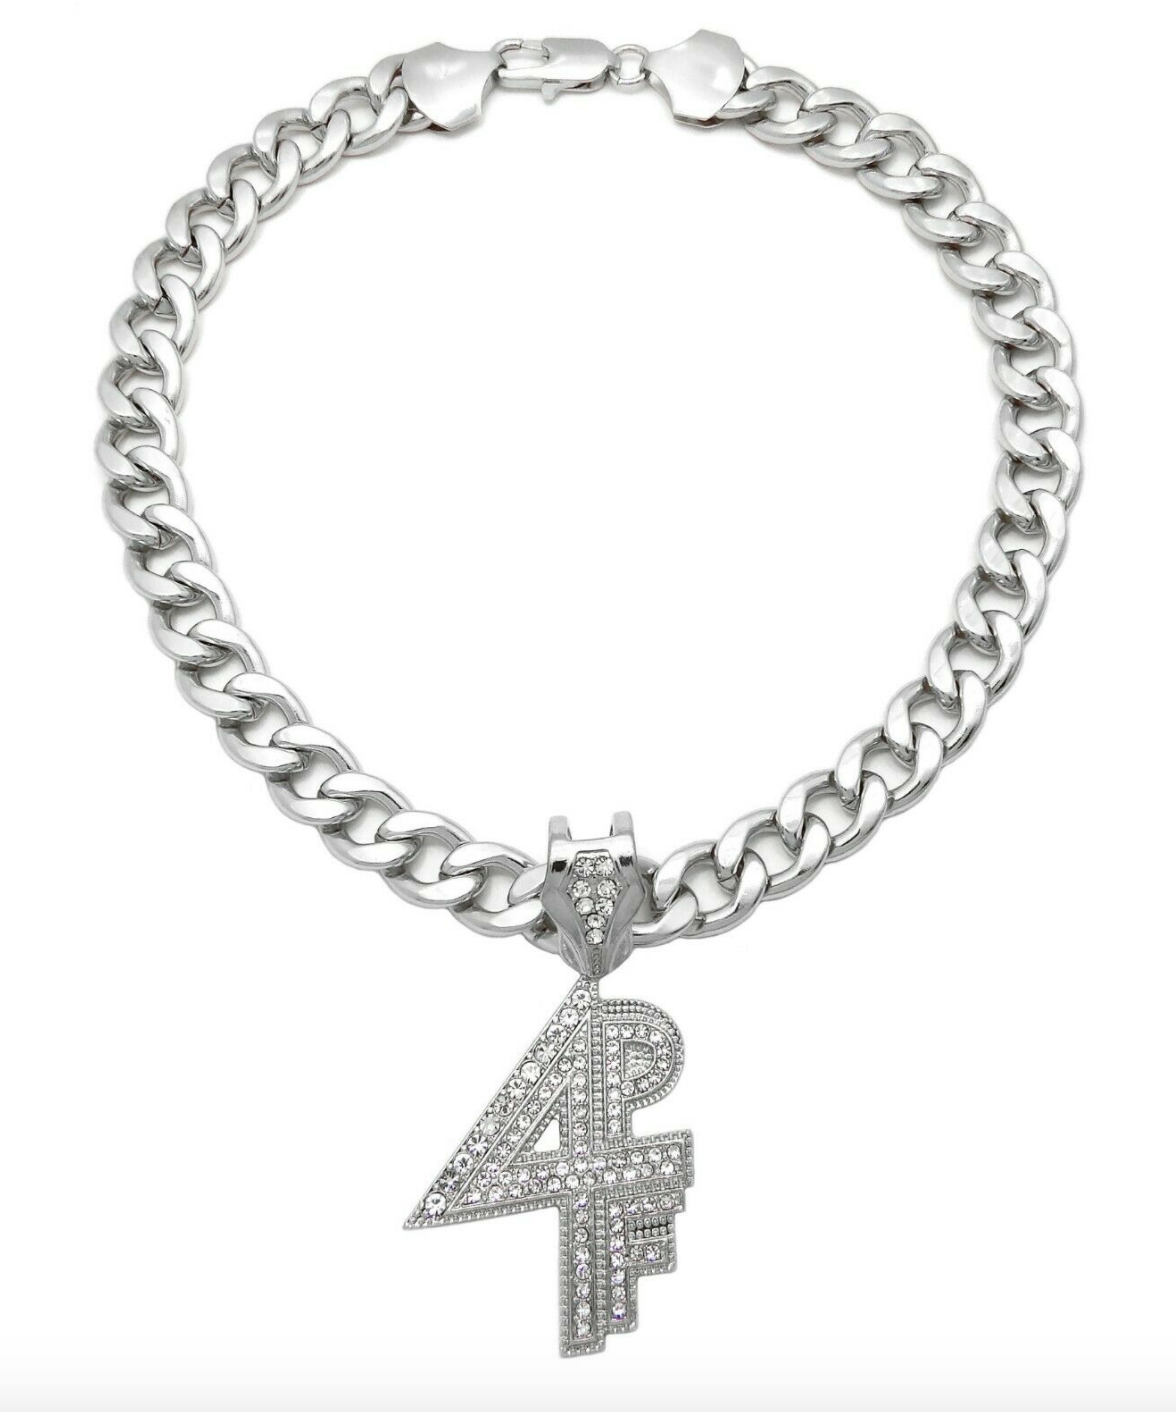 4PF Pendant Lil Baby Silver Chain 4PF Necklace Rapper Iced Out Cuban Link 18in.